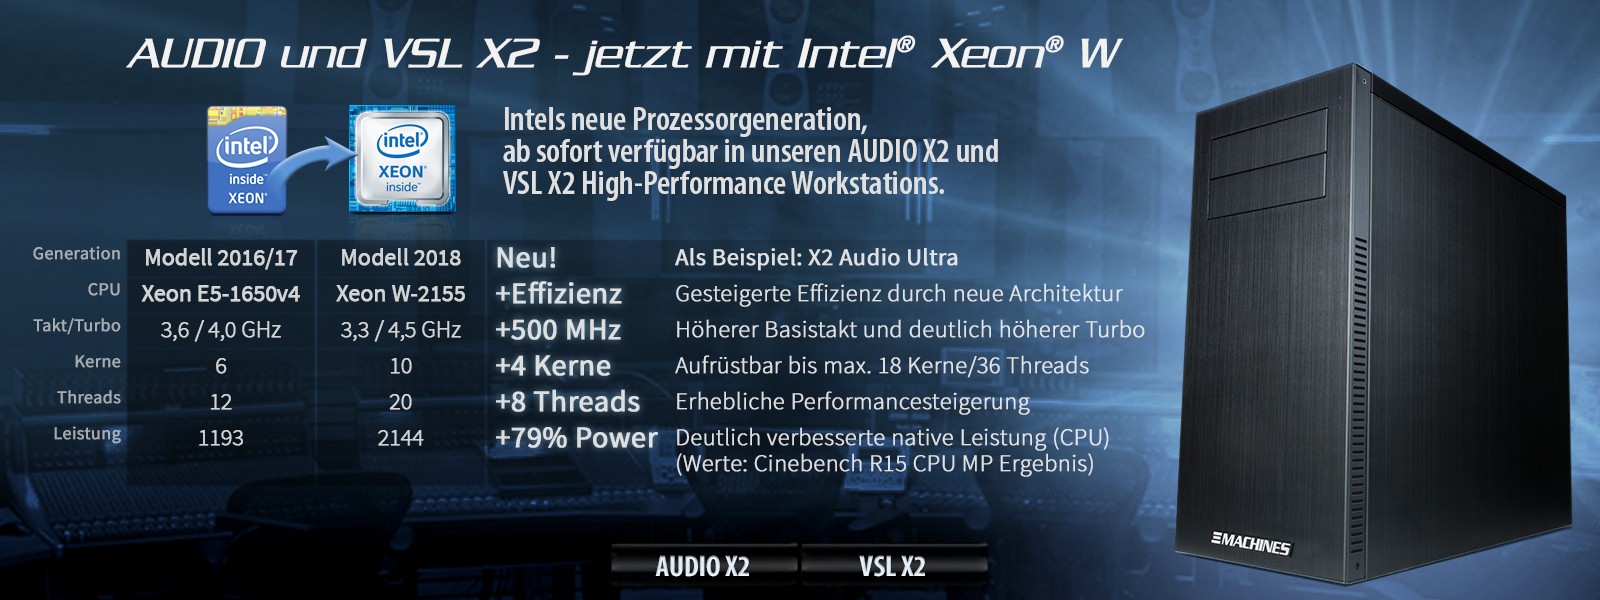 AUDIO X2 WORKSTATIONS with Intel´s newest CPU generation Xeon W